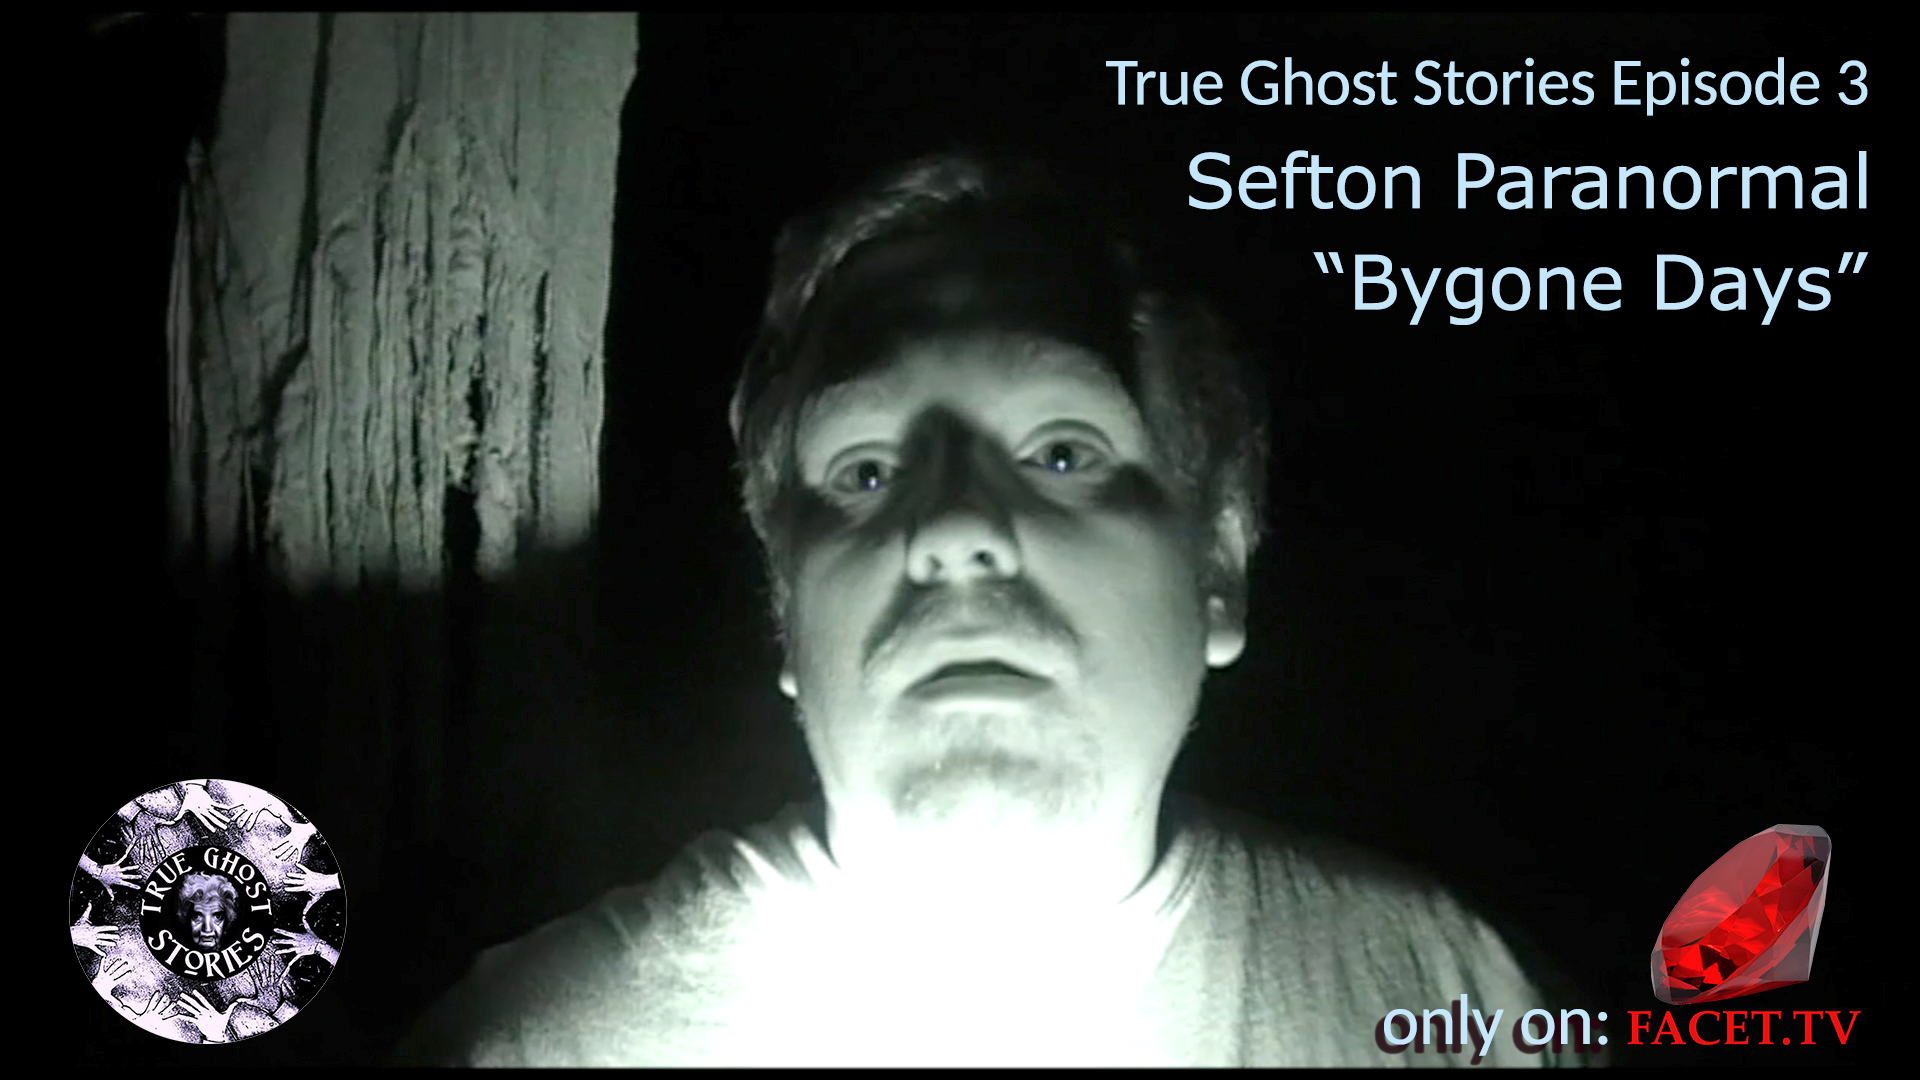 Photo for True Ghost Stories - Season Two (all 12 episodes) on ViewStub